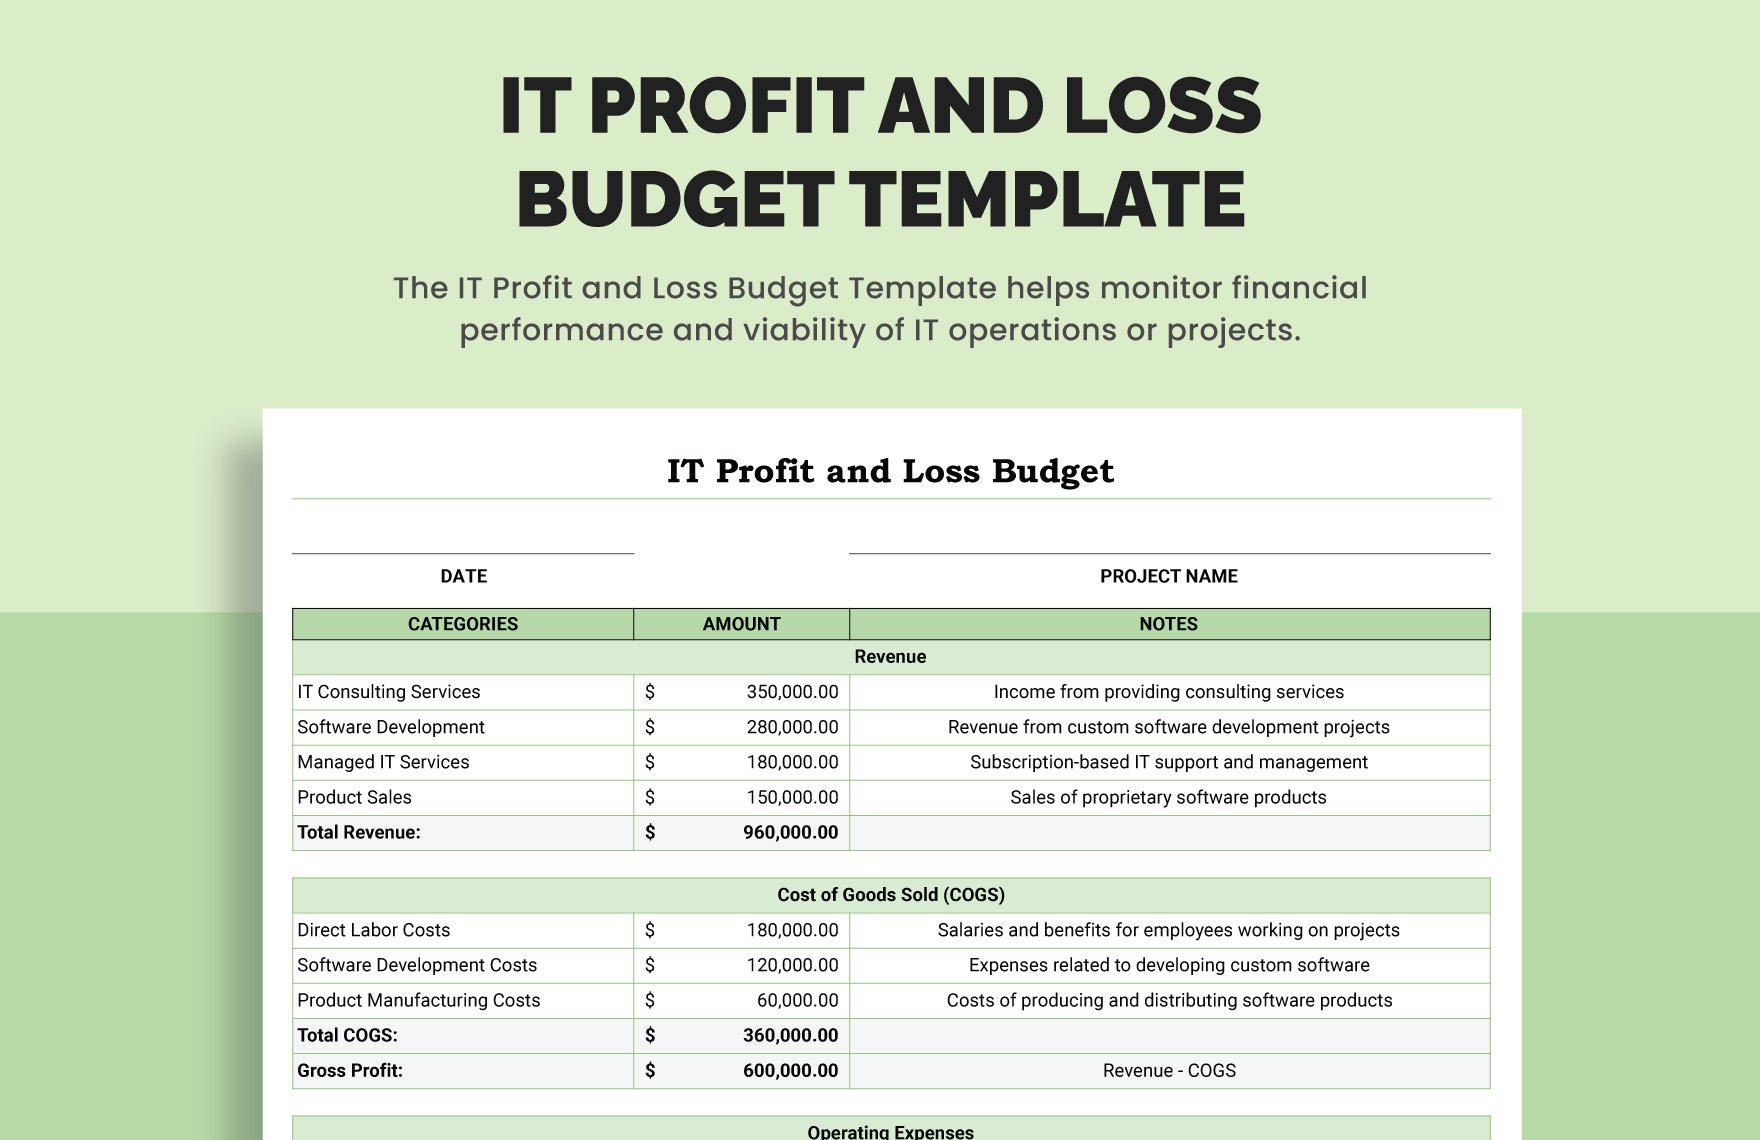 IT Profit and Loss Budget Template